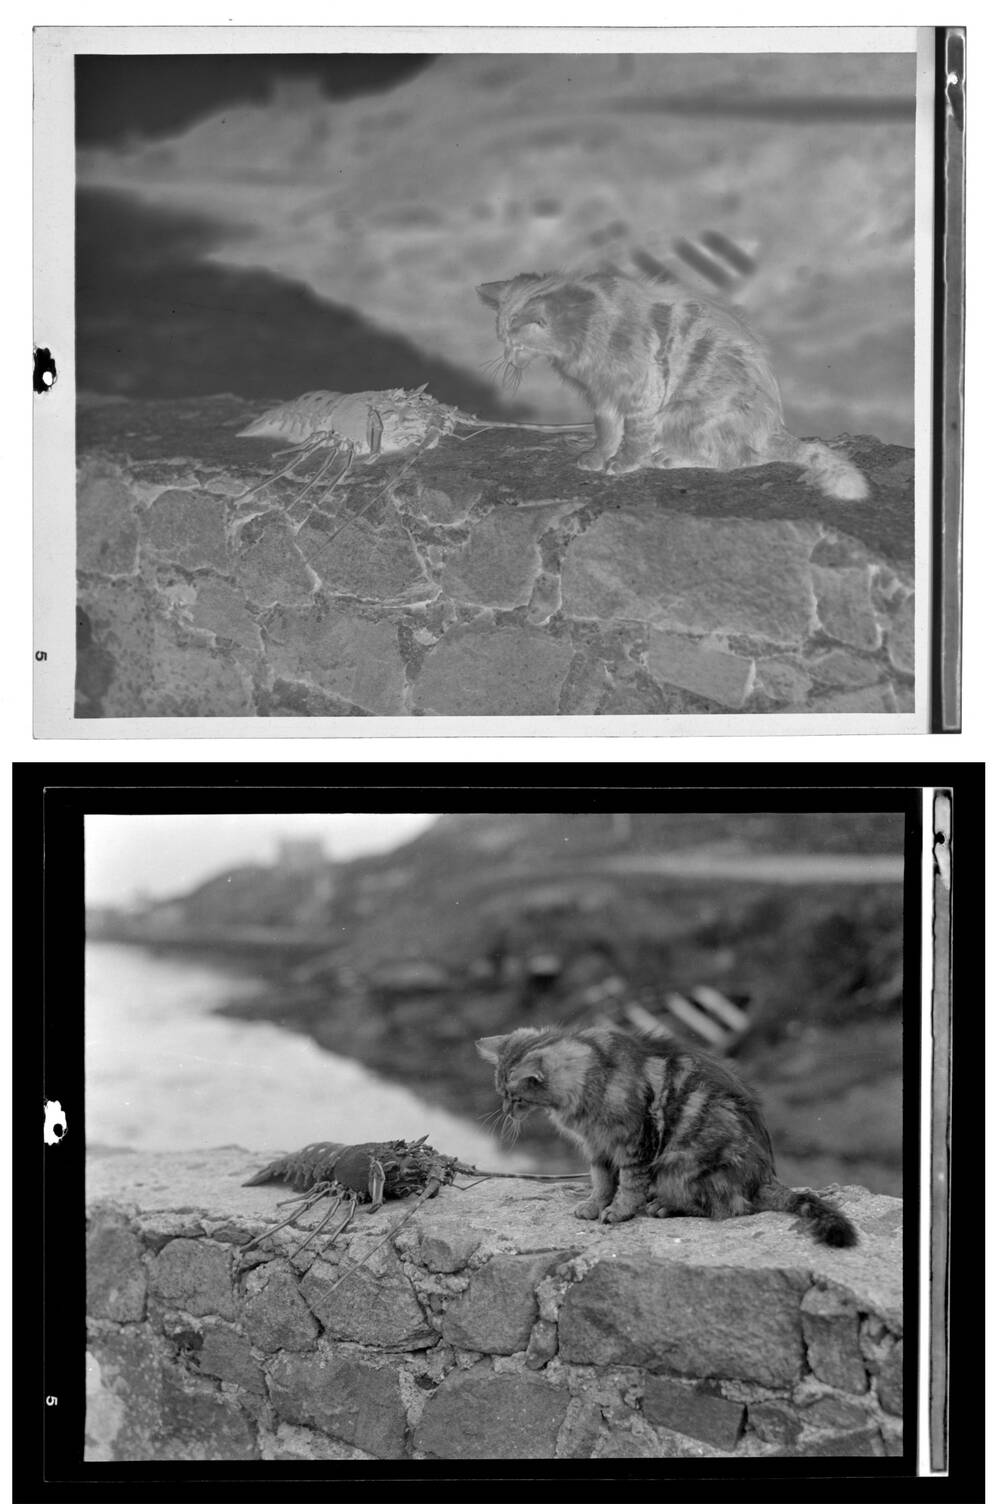 A black and white photo in negative and positive of a cat and a crayfish facing each other on a wall, with the sea behind.